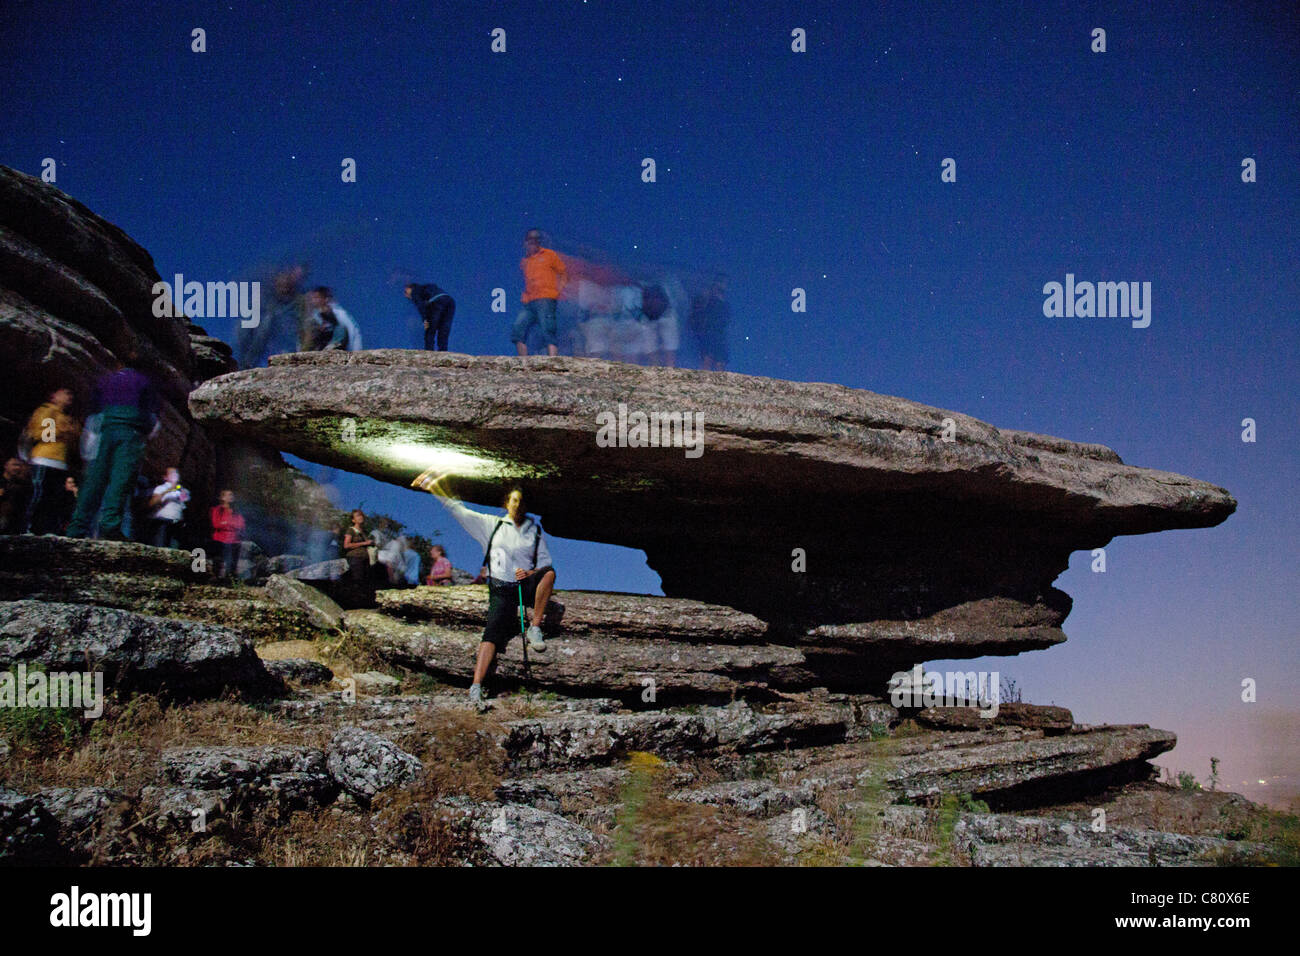 Hikers in a moonlit night Natural Park El Torcal Antequera Malaga Andalusia Spain Stock Photo